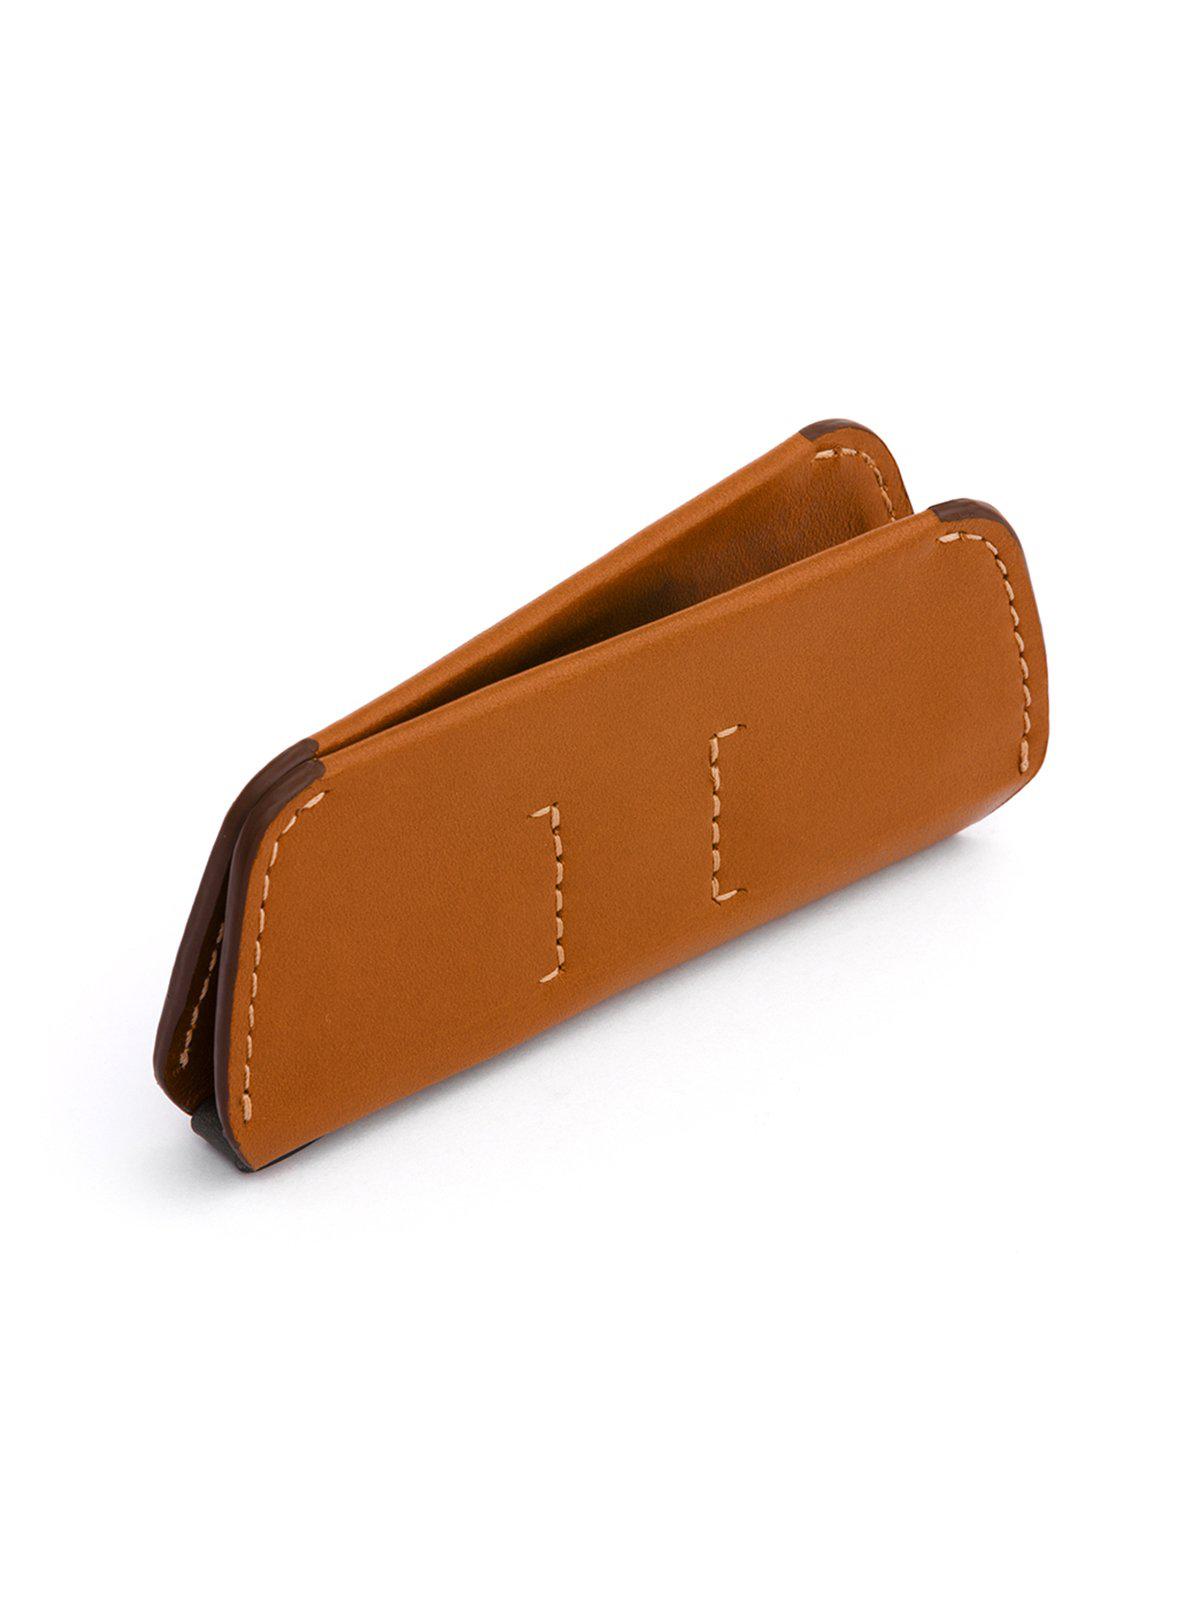 Bellroy Key Cover Plus Caramel - MORE by Morello Indonesia